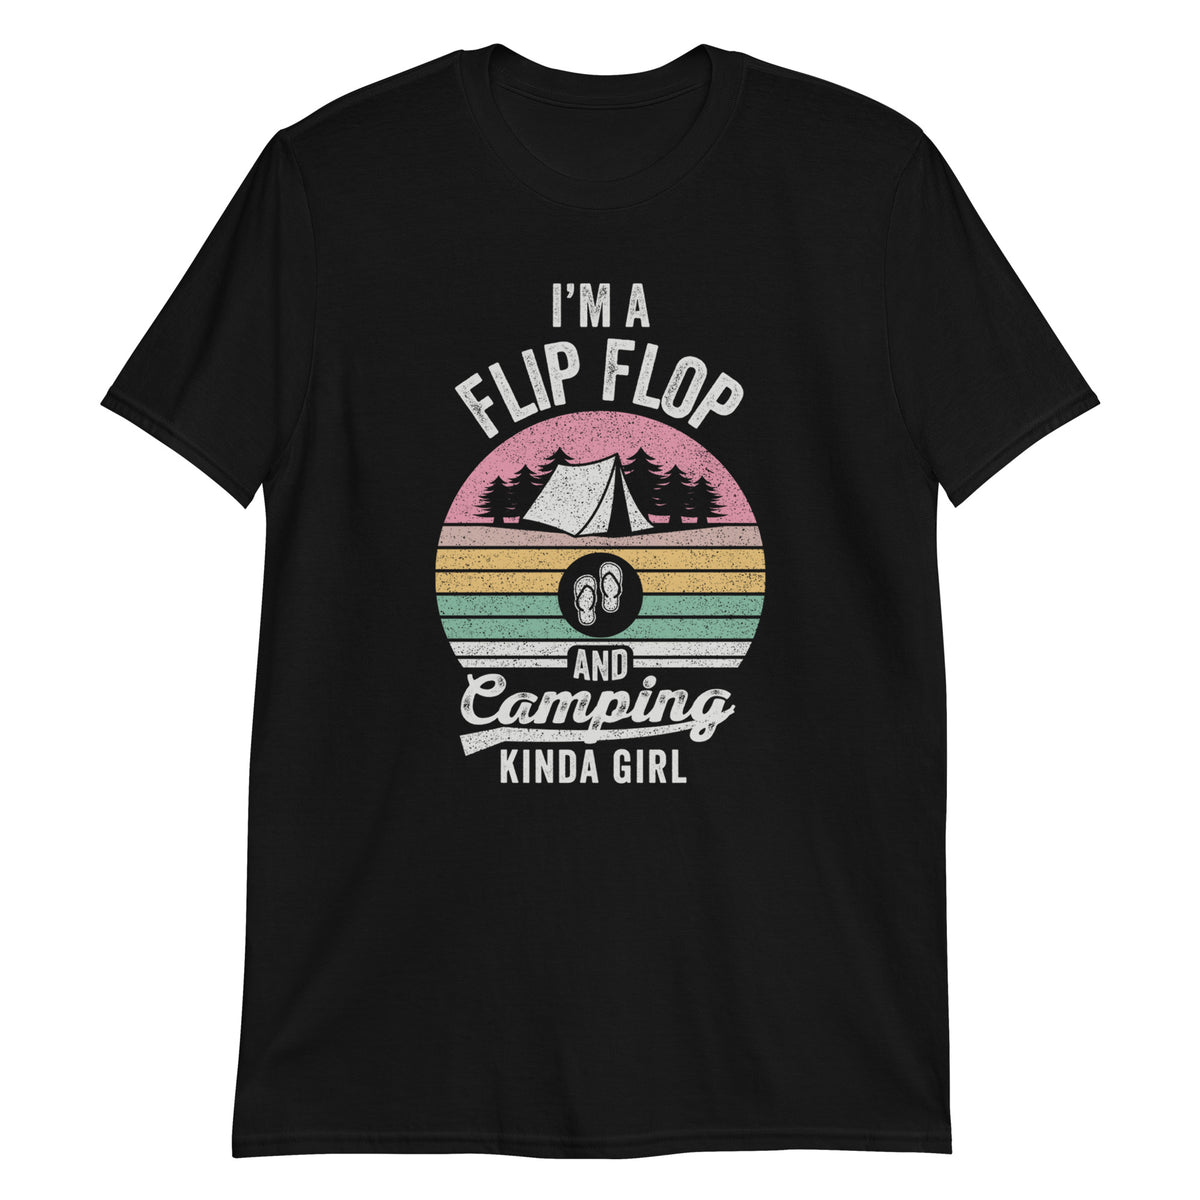 I'm a Flip Flop and Camping Kinda Girl T-Shirt